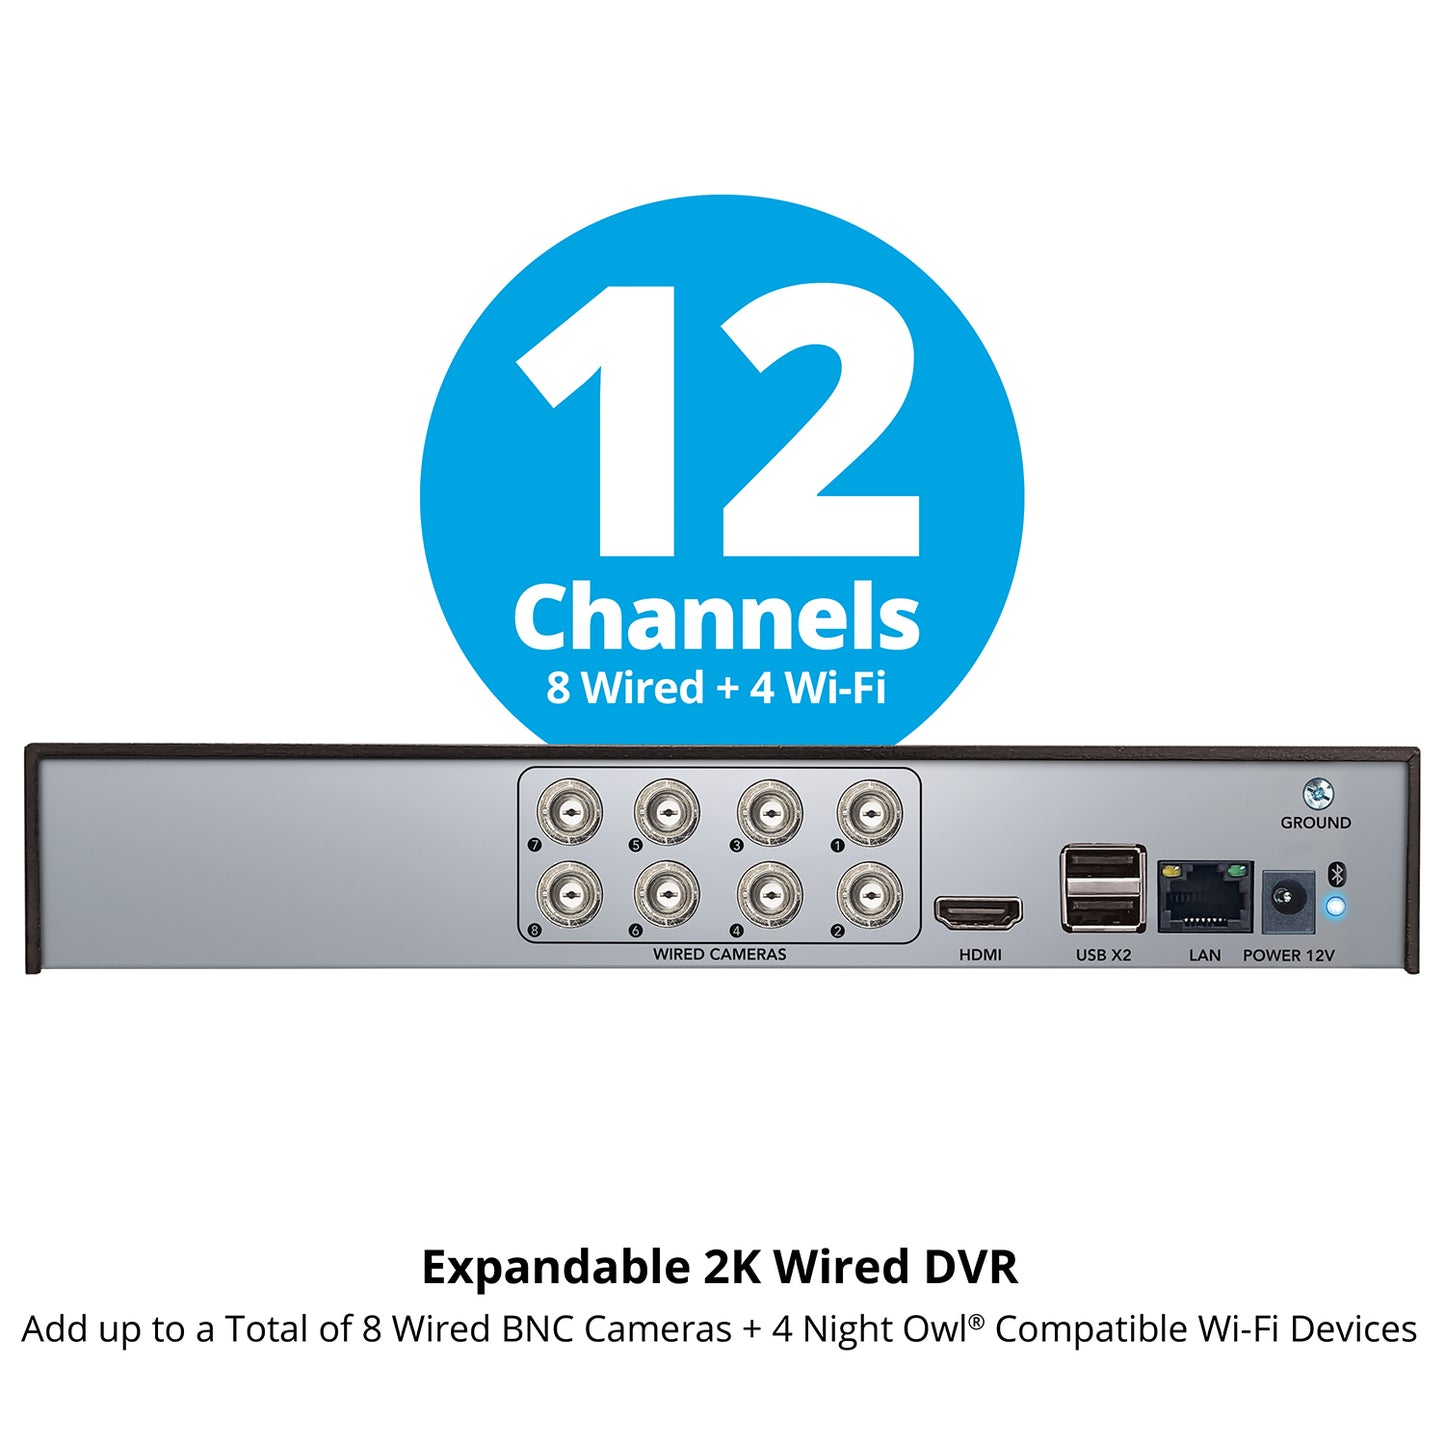 2-Way Audio 12 Channel DVR Security System with 2TB Hard Drive and 6 Wired 2K Deterrence Dome Cameras